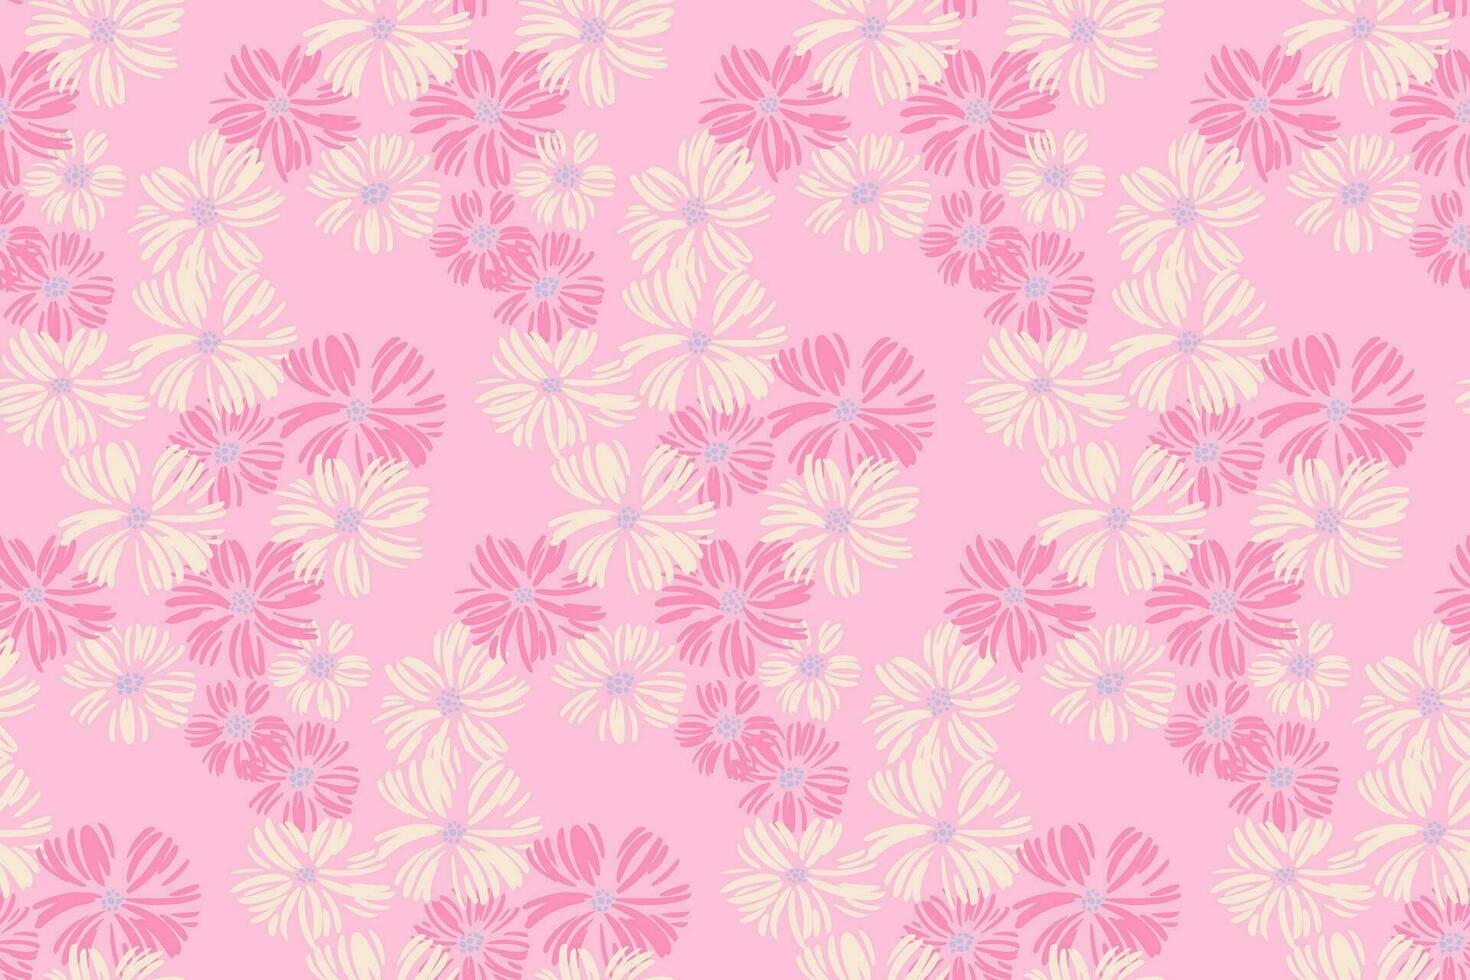 Vector doodle hand drawn daisy flowers seamless pattern. Monotone pastel pink ditsy floral brush shape print. Design for fashion, textile, fabric, wallpaper